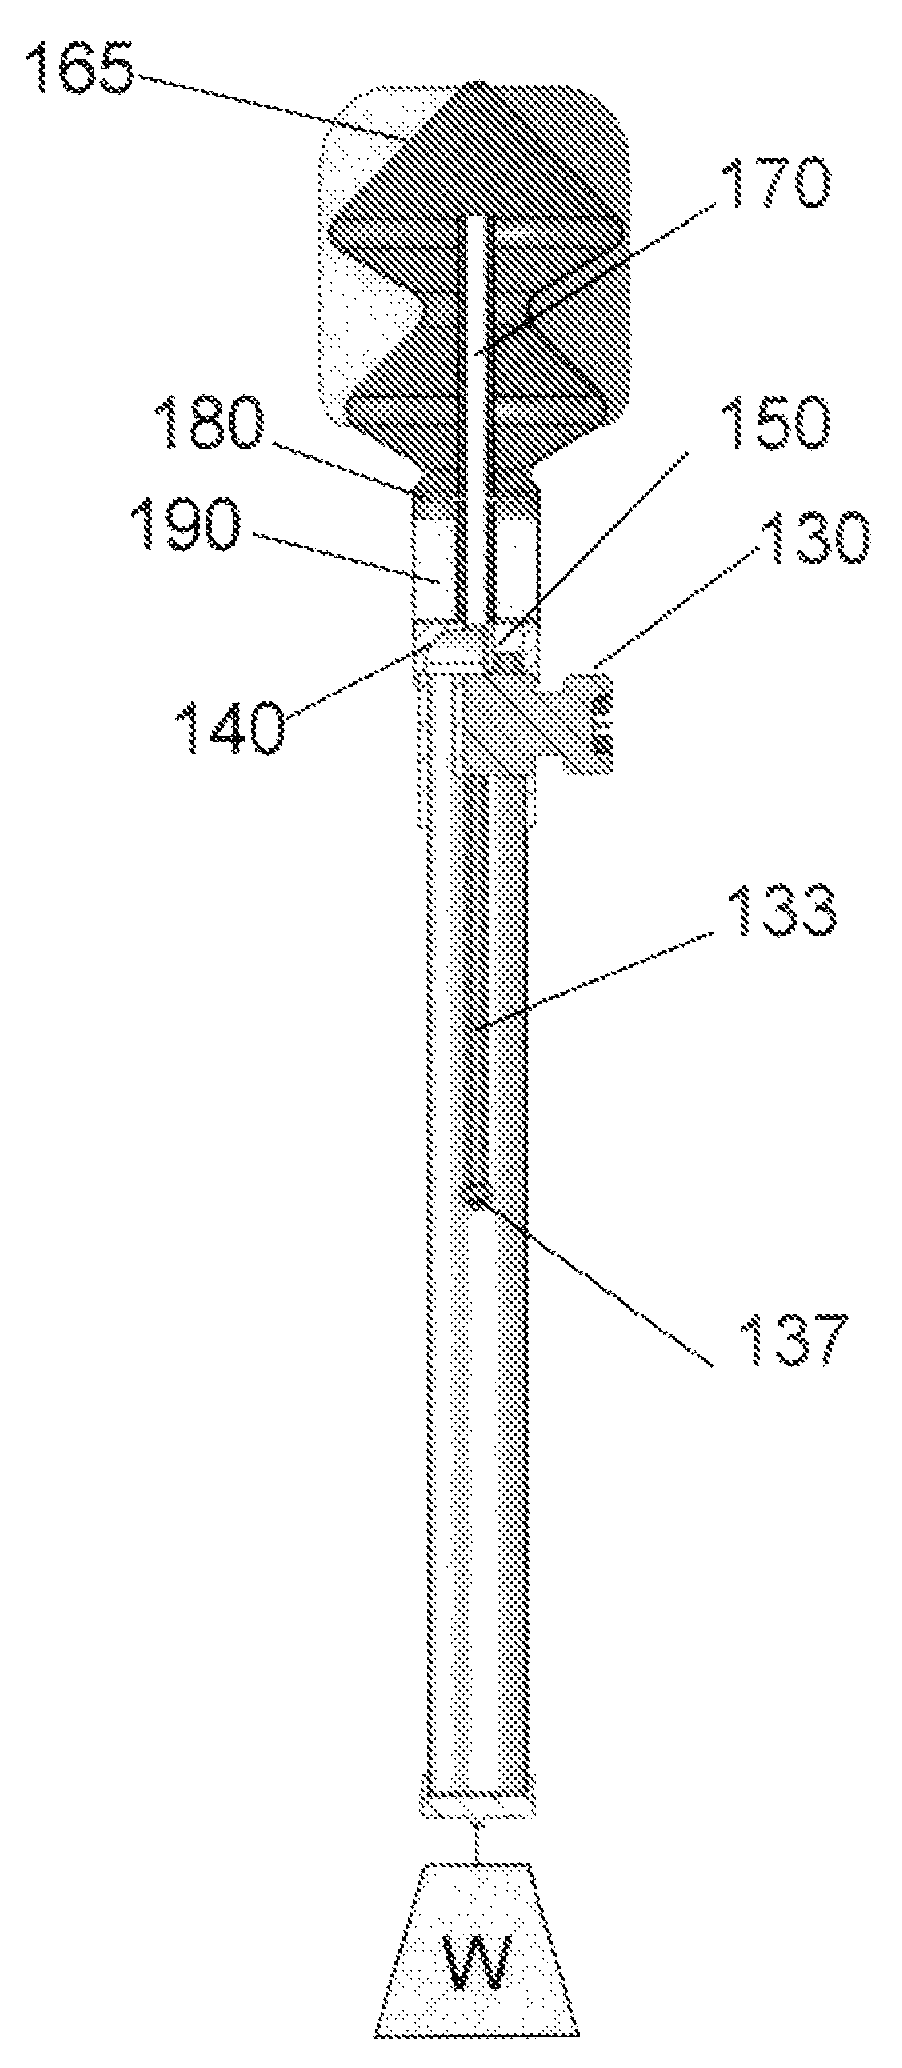 Fuel-powered actuators and methods of using same